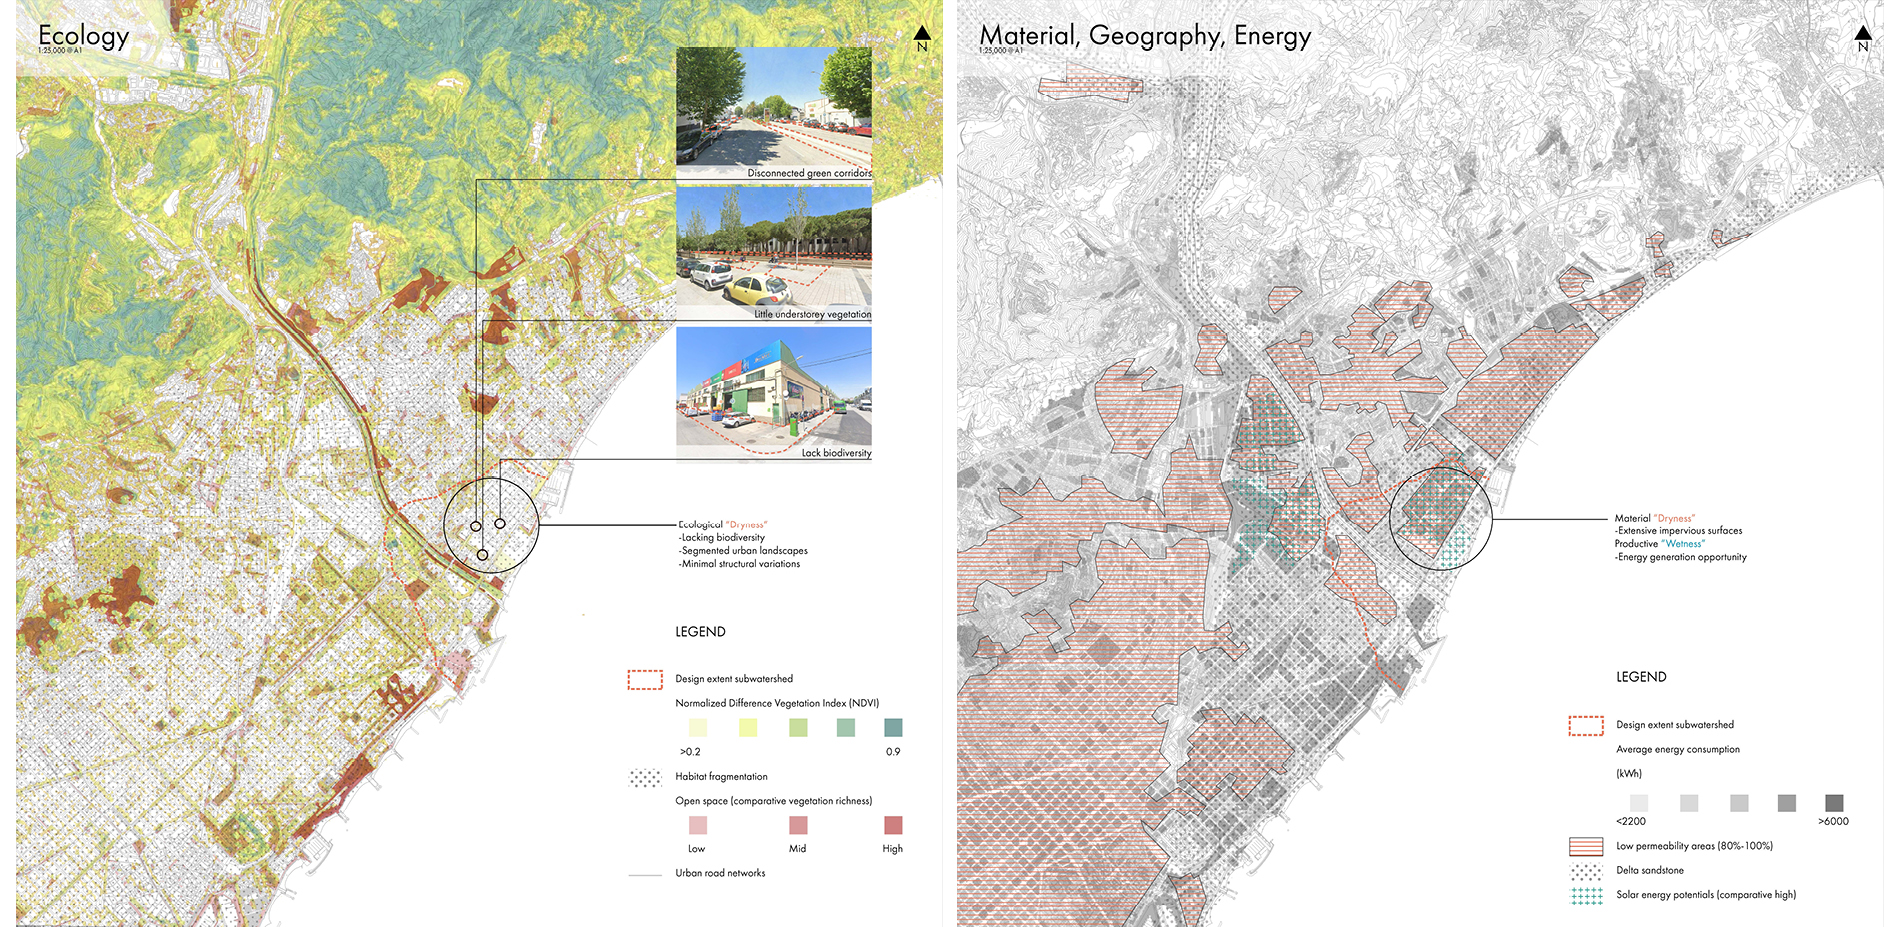 Mapping of Ecology and Material, Geography, Energy